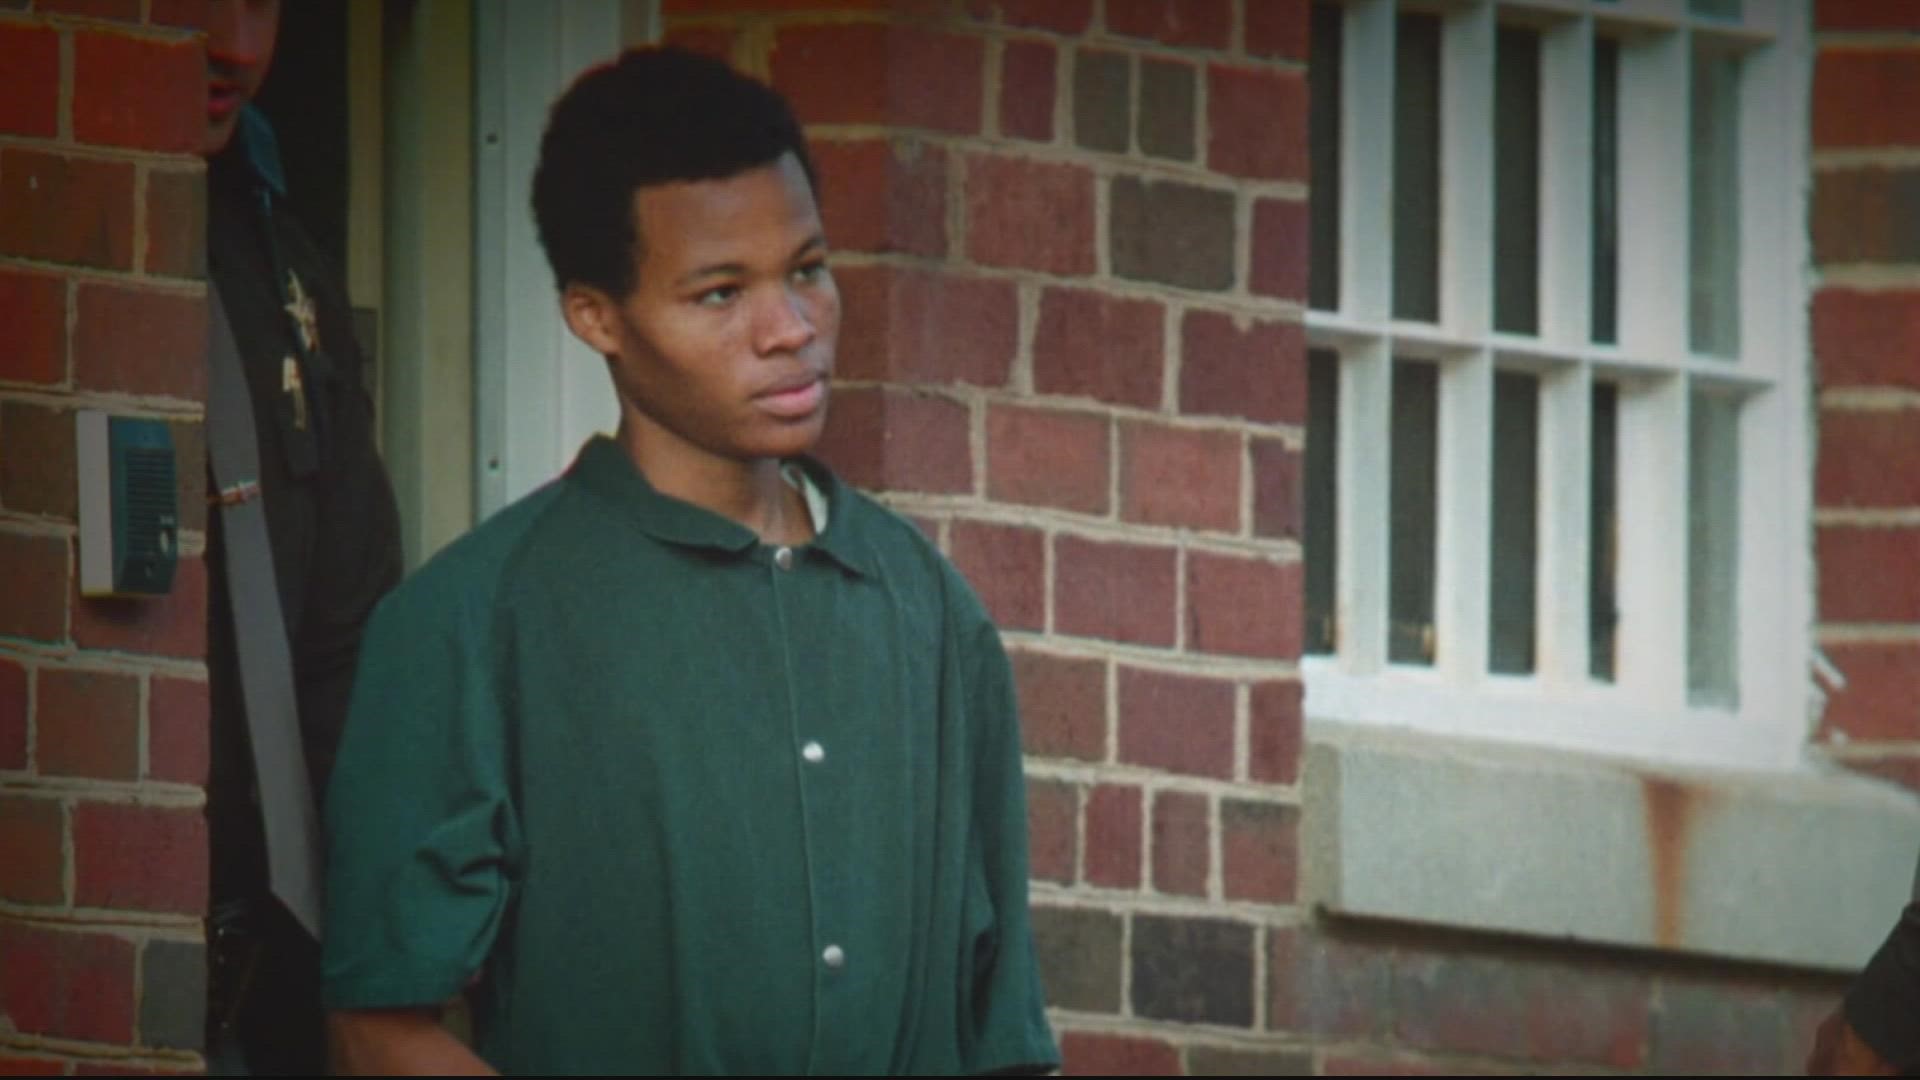 Lee Boyd Malvo was 17 years old when he and John Allen Muhammad went on that deadly shooting rampage.